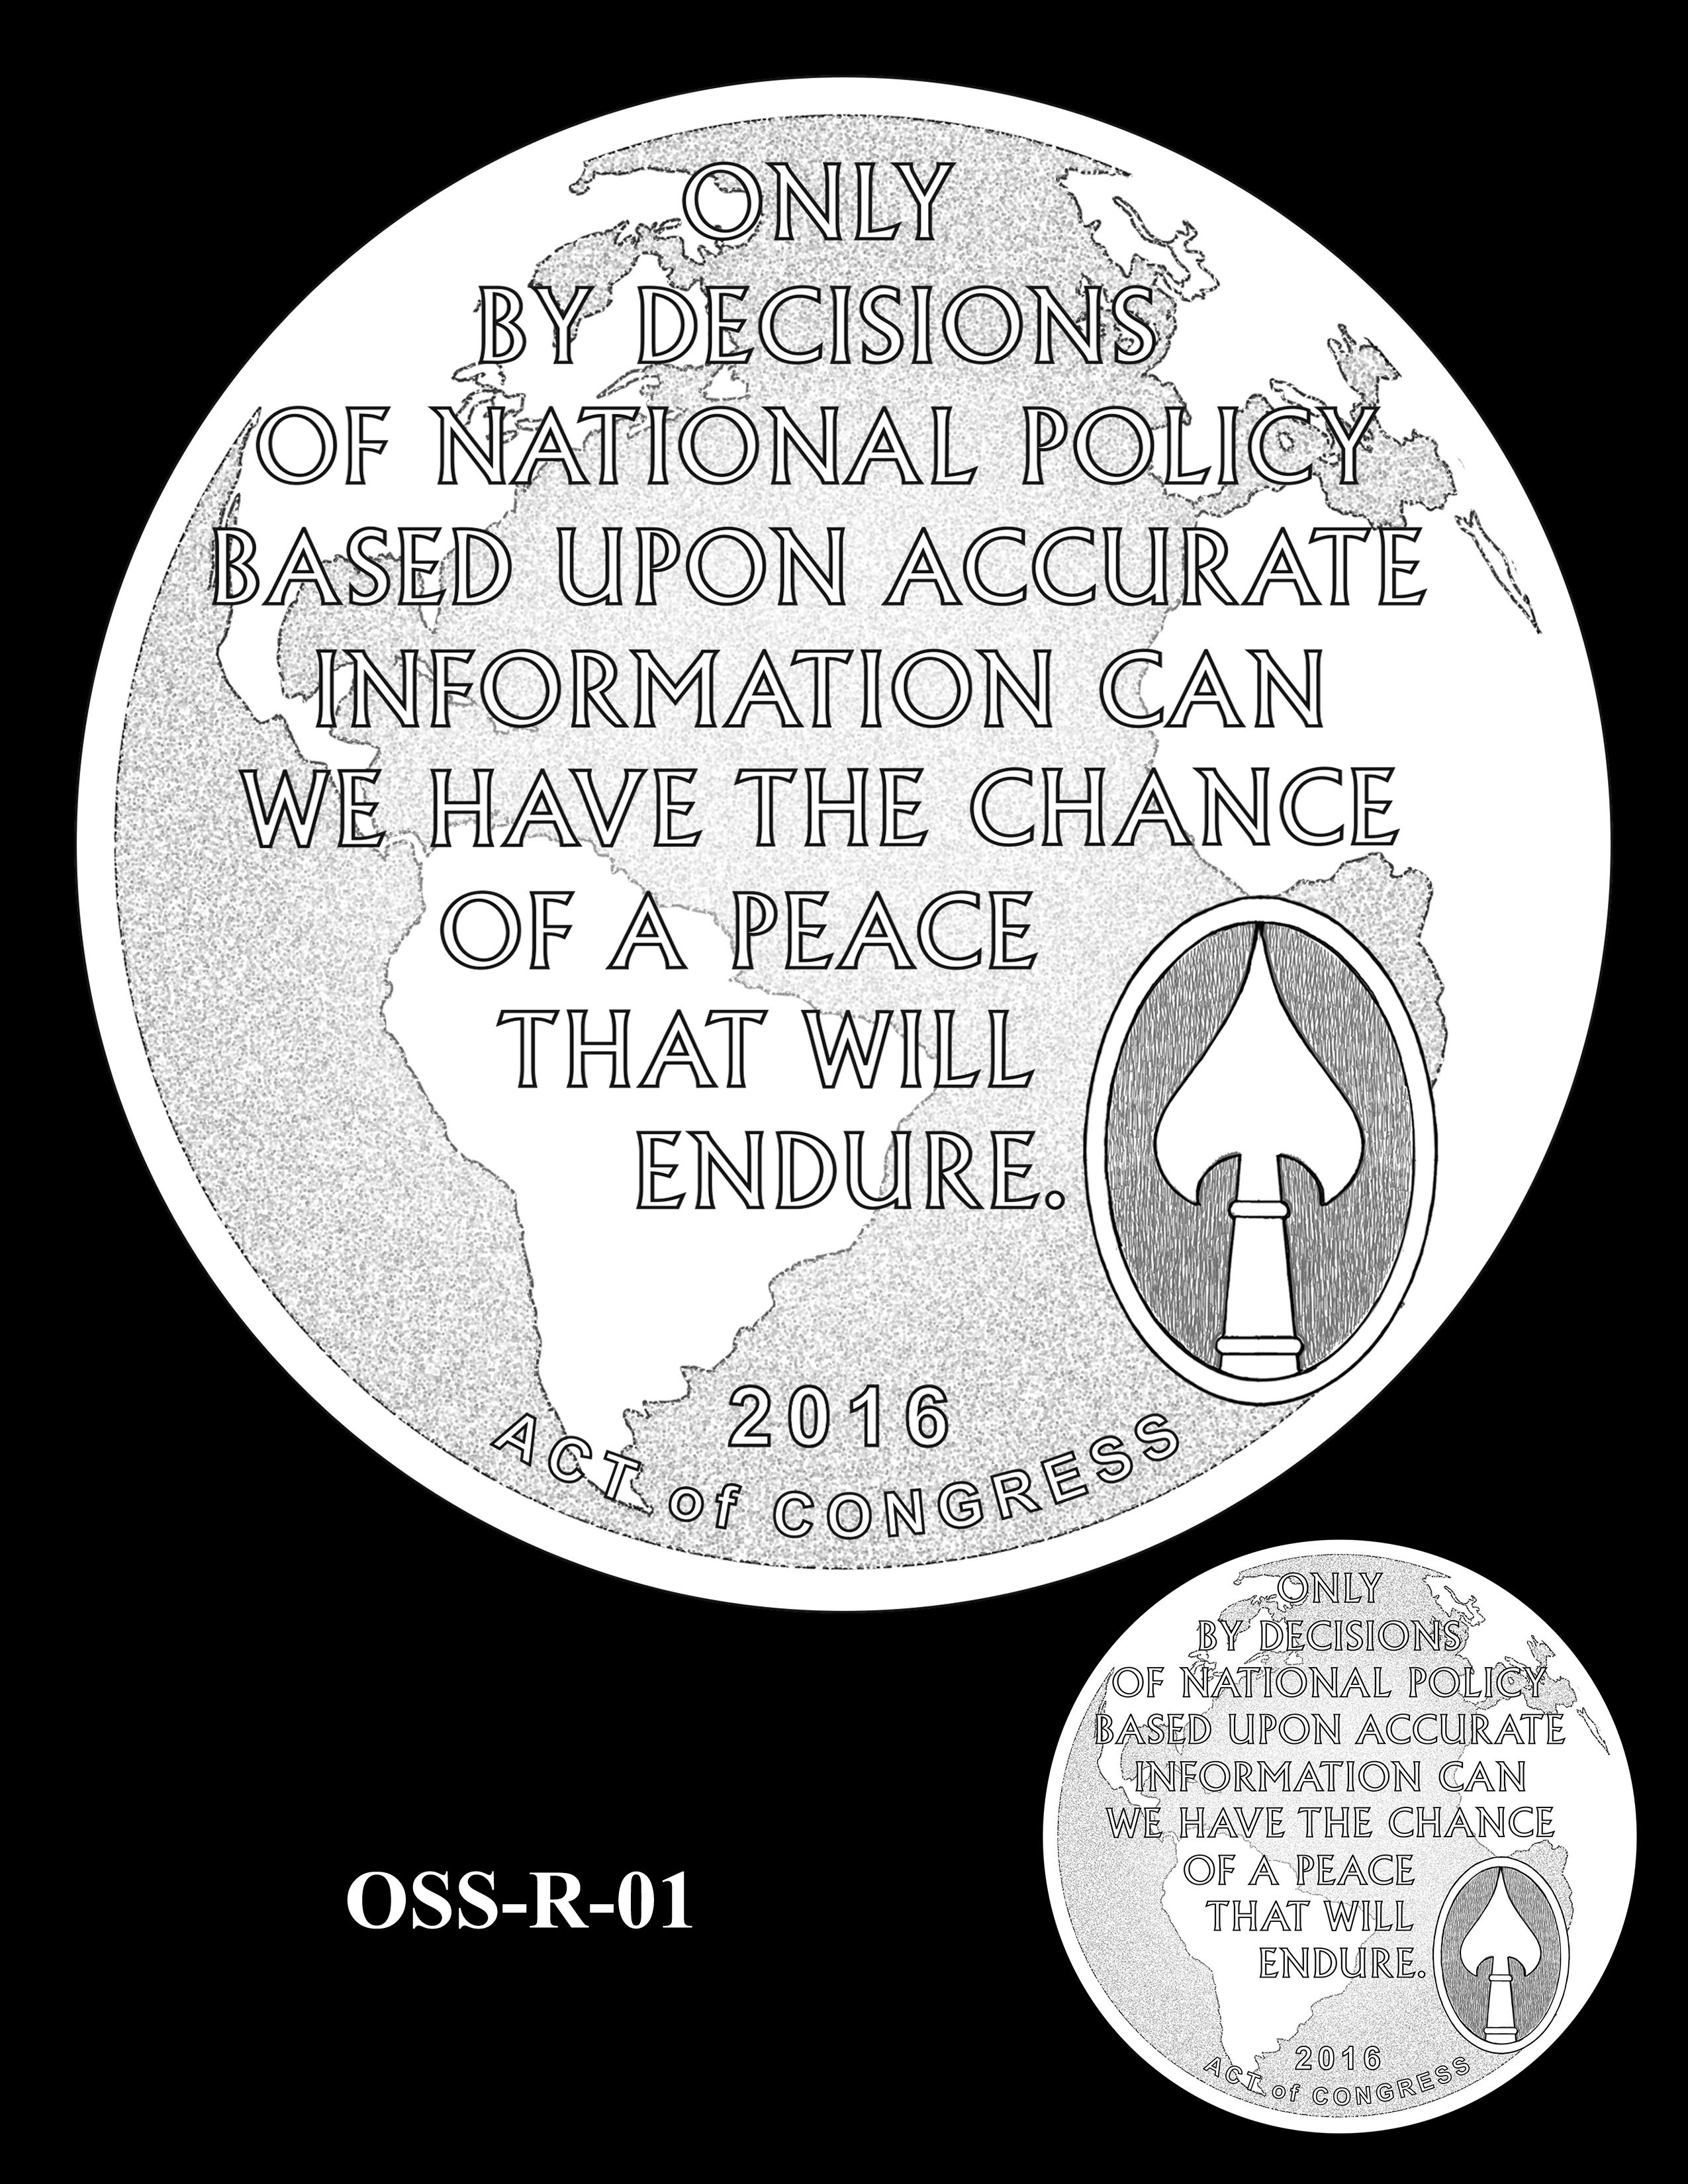 OSS-R-01 -- Office of Strategic Services Congressional Gold Medal